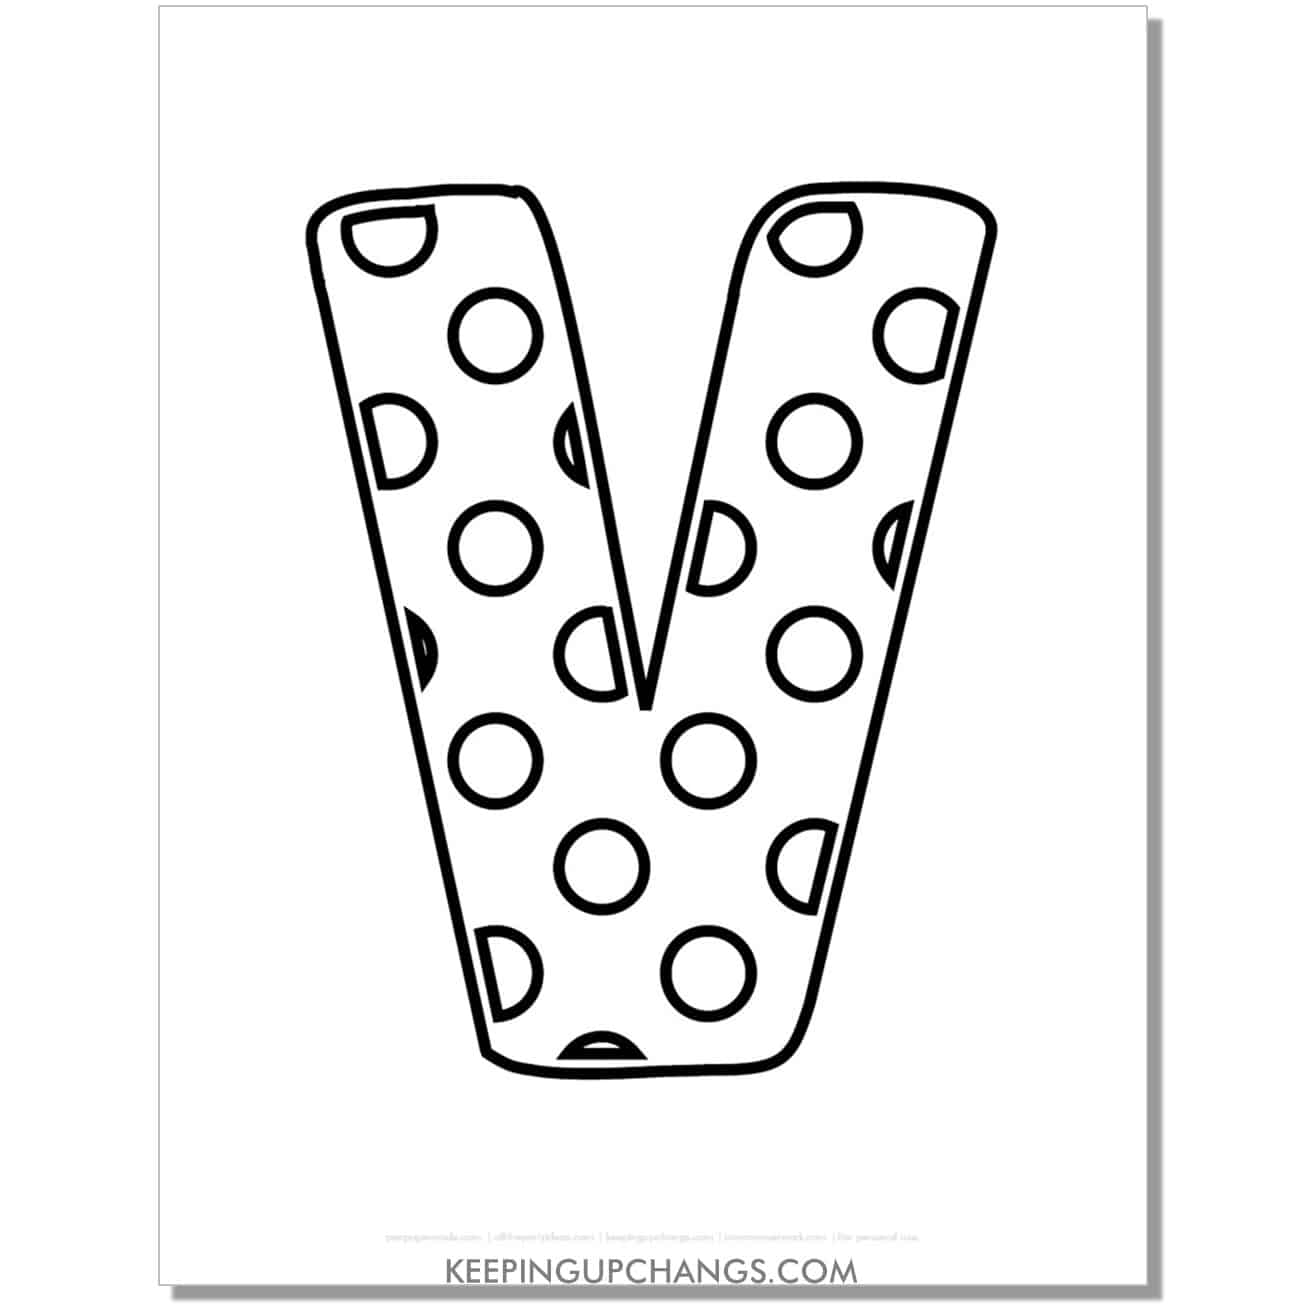 free alphabet letter v coloring page with polka dots for toddlers, preschool, kindergarten.